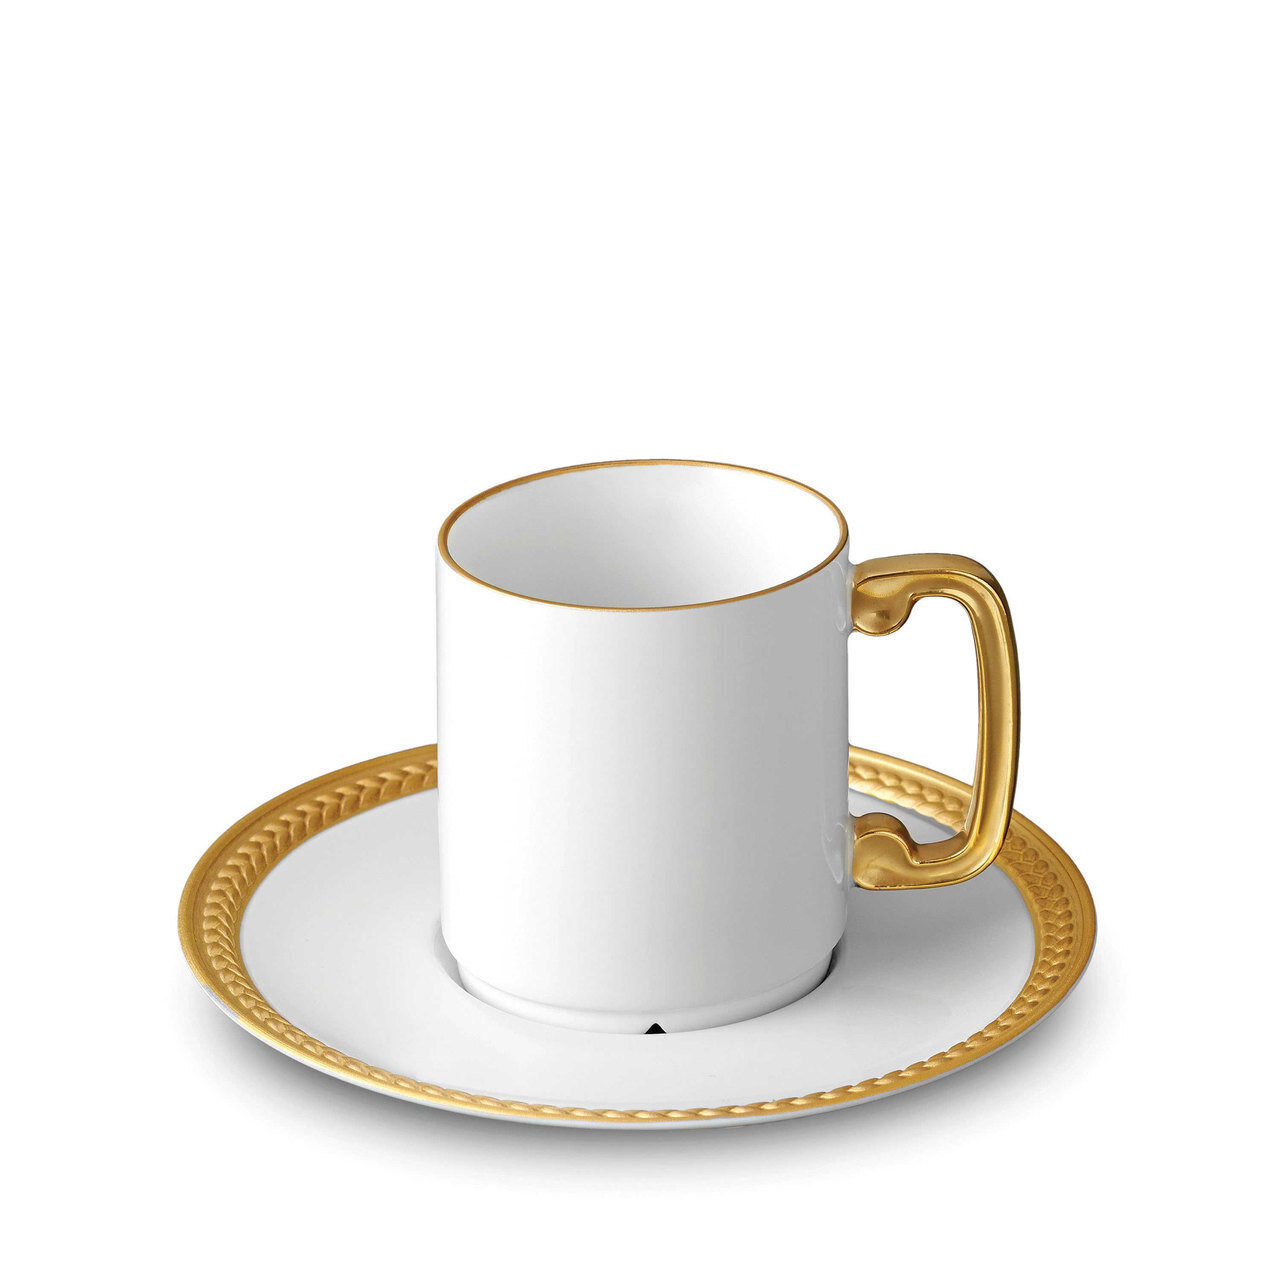 L'Objet Soie Tressee Espresso Cup and Saucer Gold